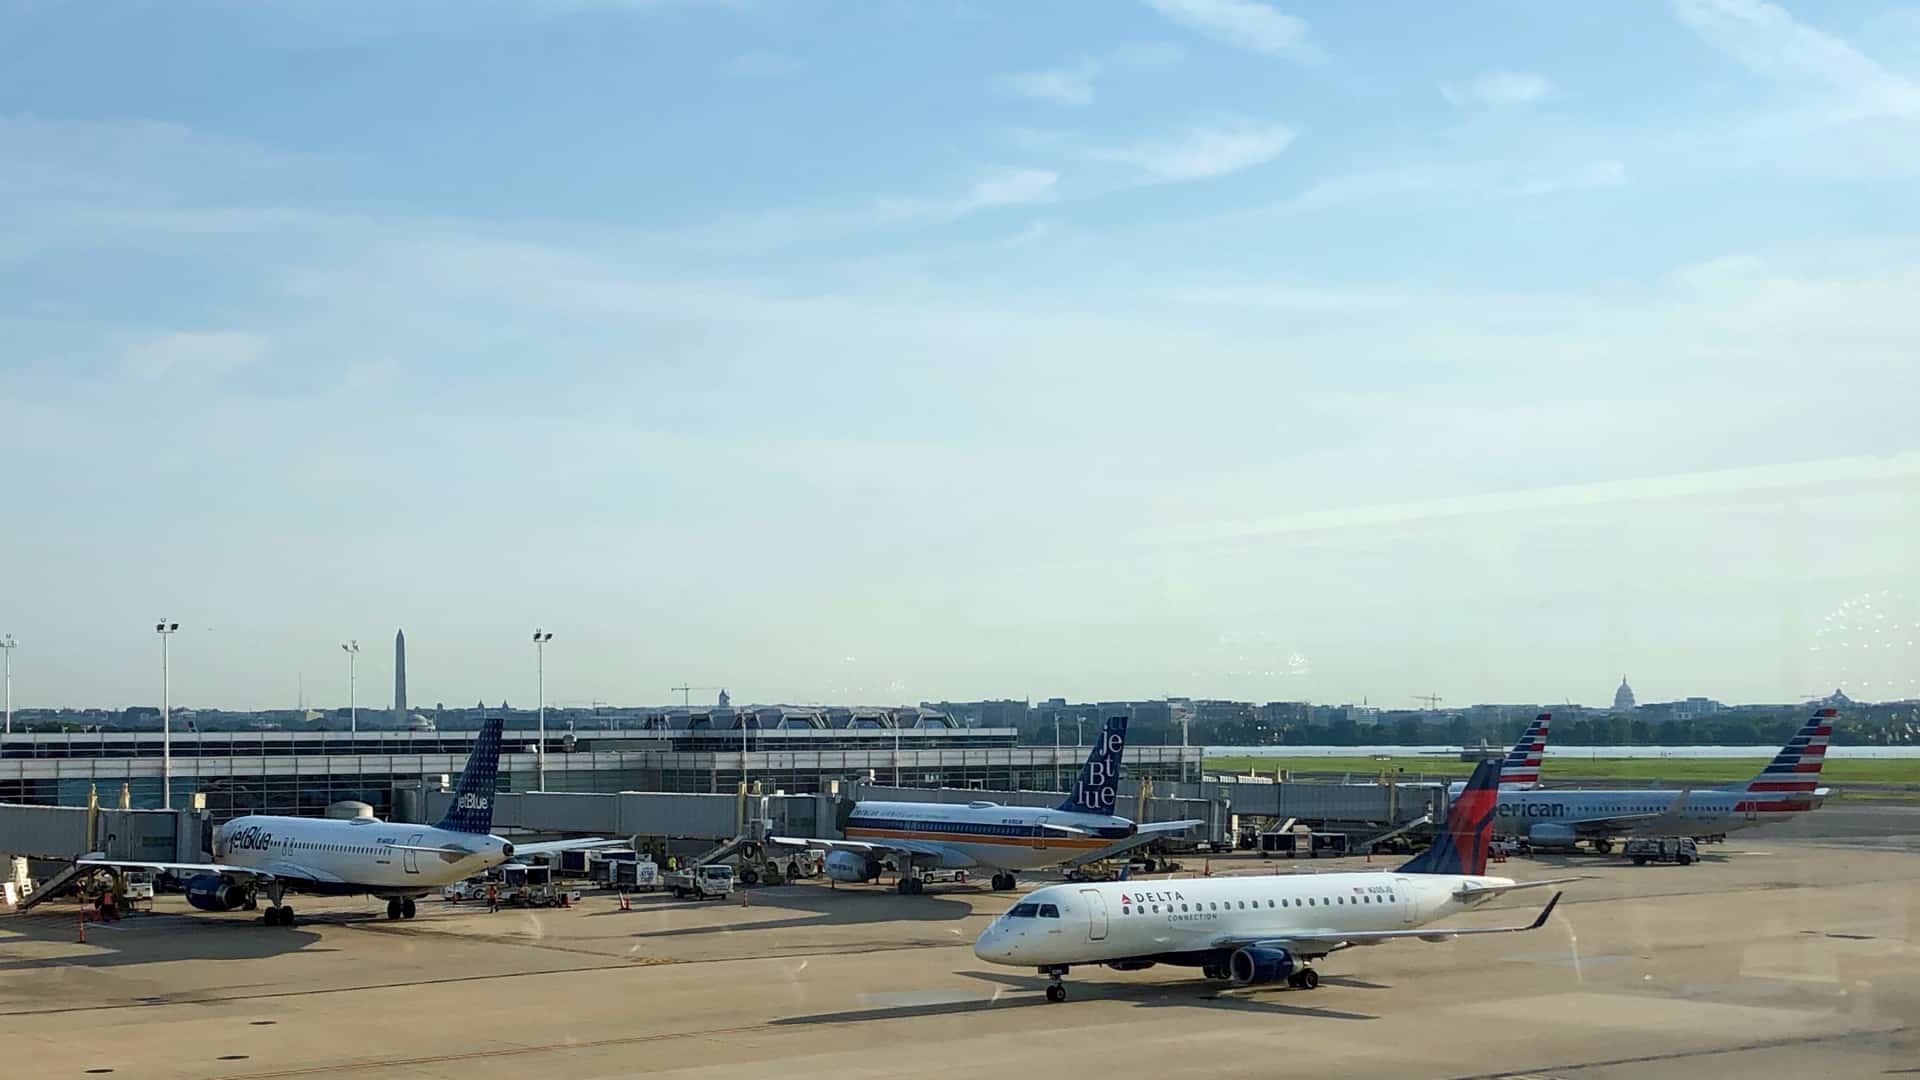 Washington DC skyline as seen from Reagan National Airport (DCA)